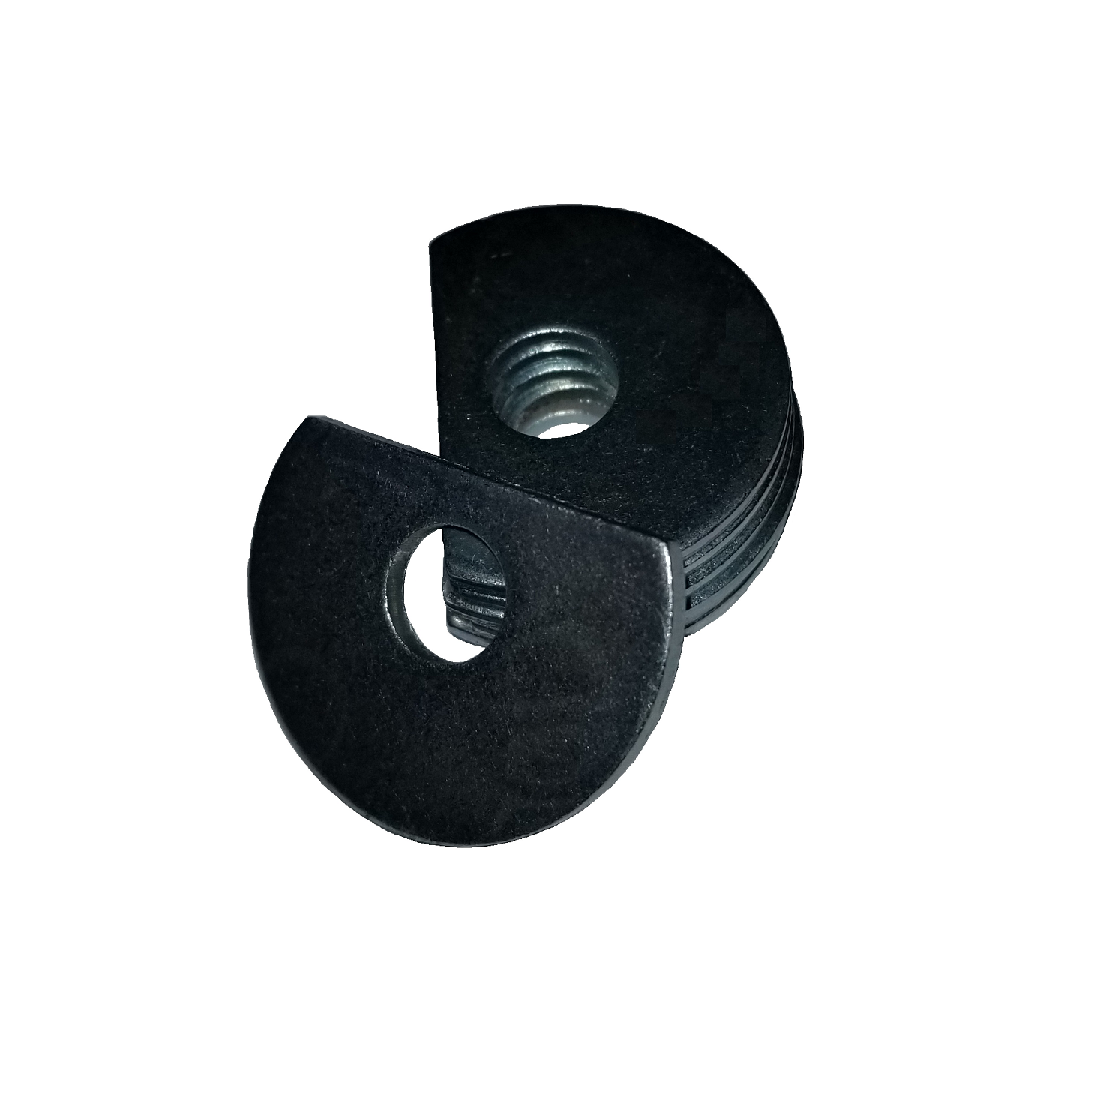 Clipped OD Washer - 0.213 ID, 0.580 OD, 0.063 Thick, Low Carbon Steel - Soft, Zinc & Black